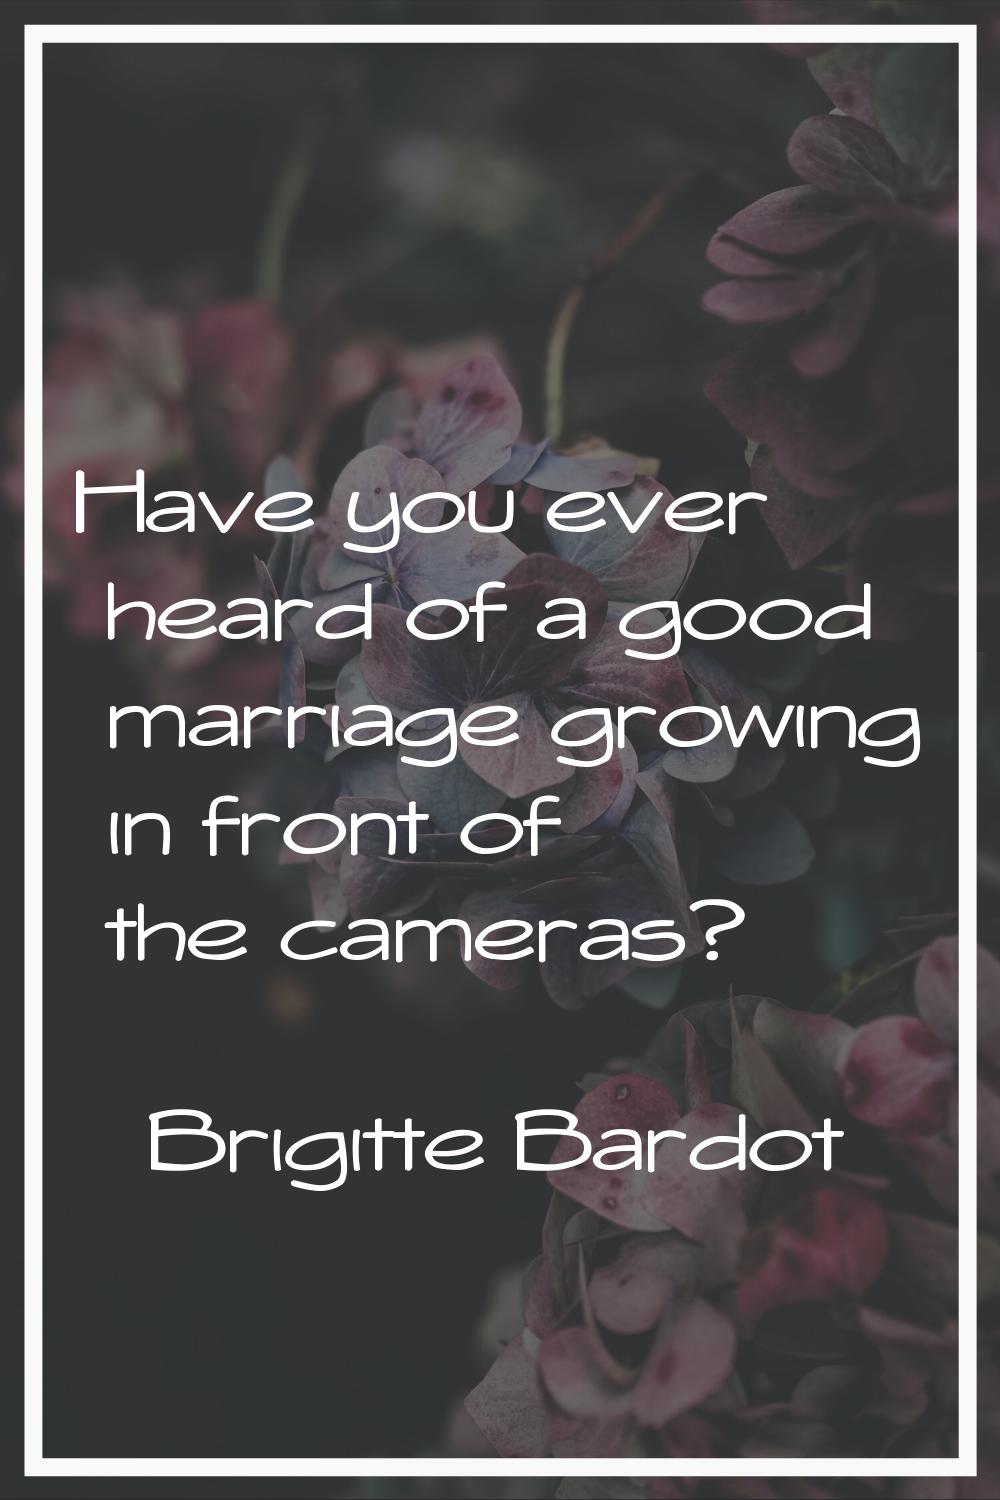 Have you ever heard of a good marriage growing in front of the cameras?